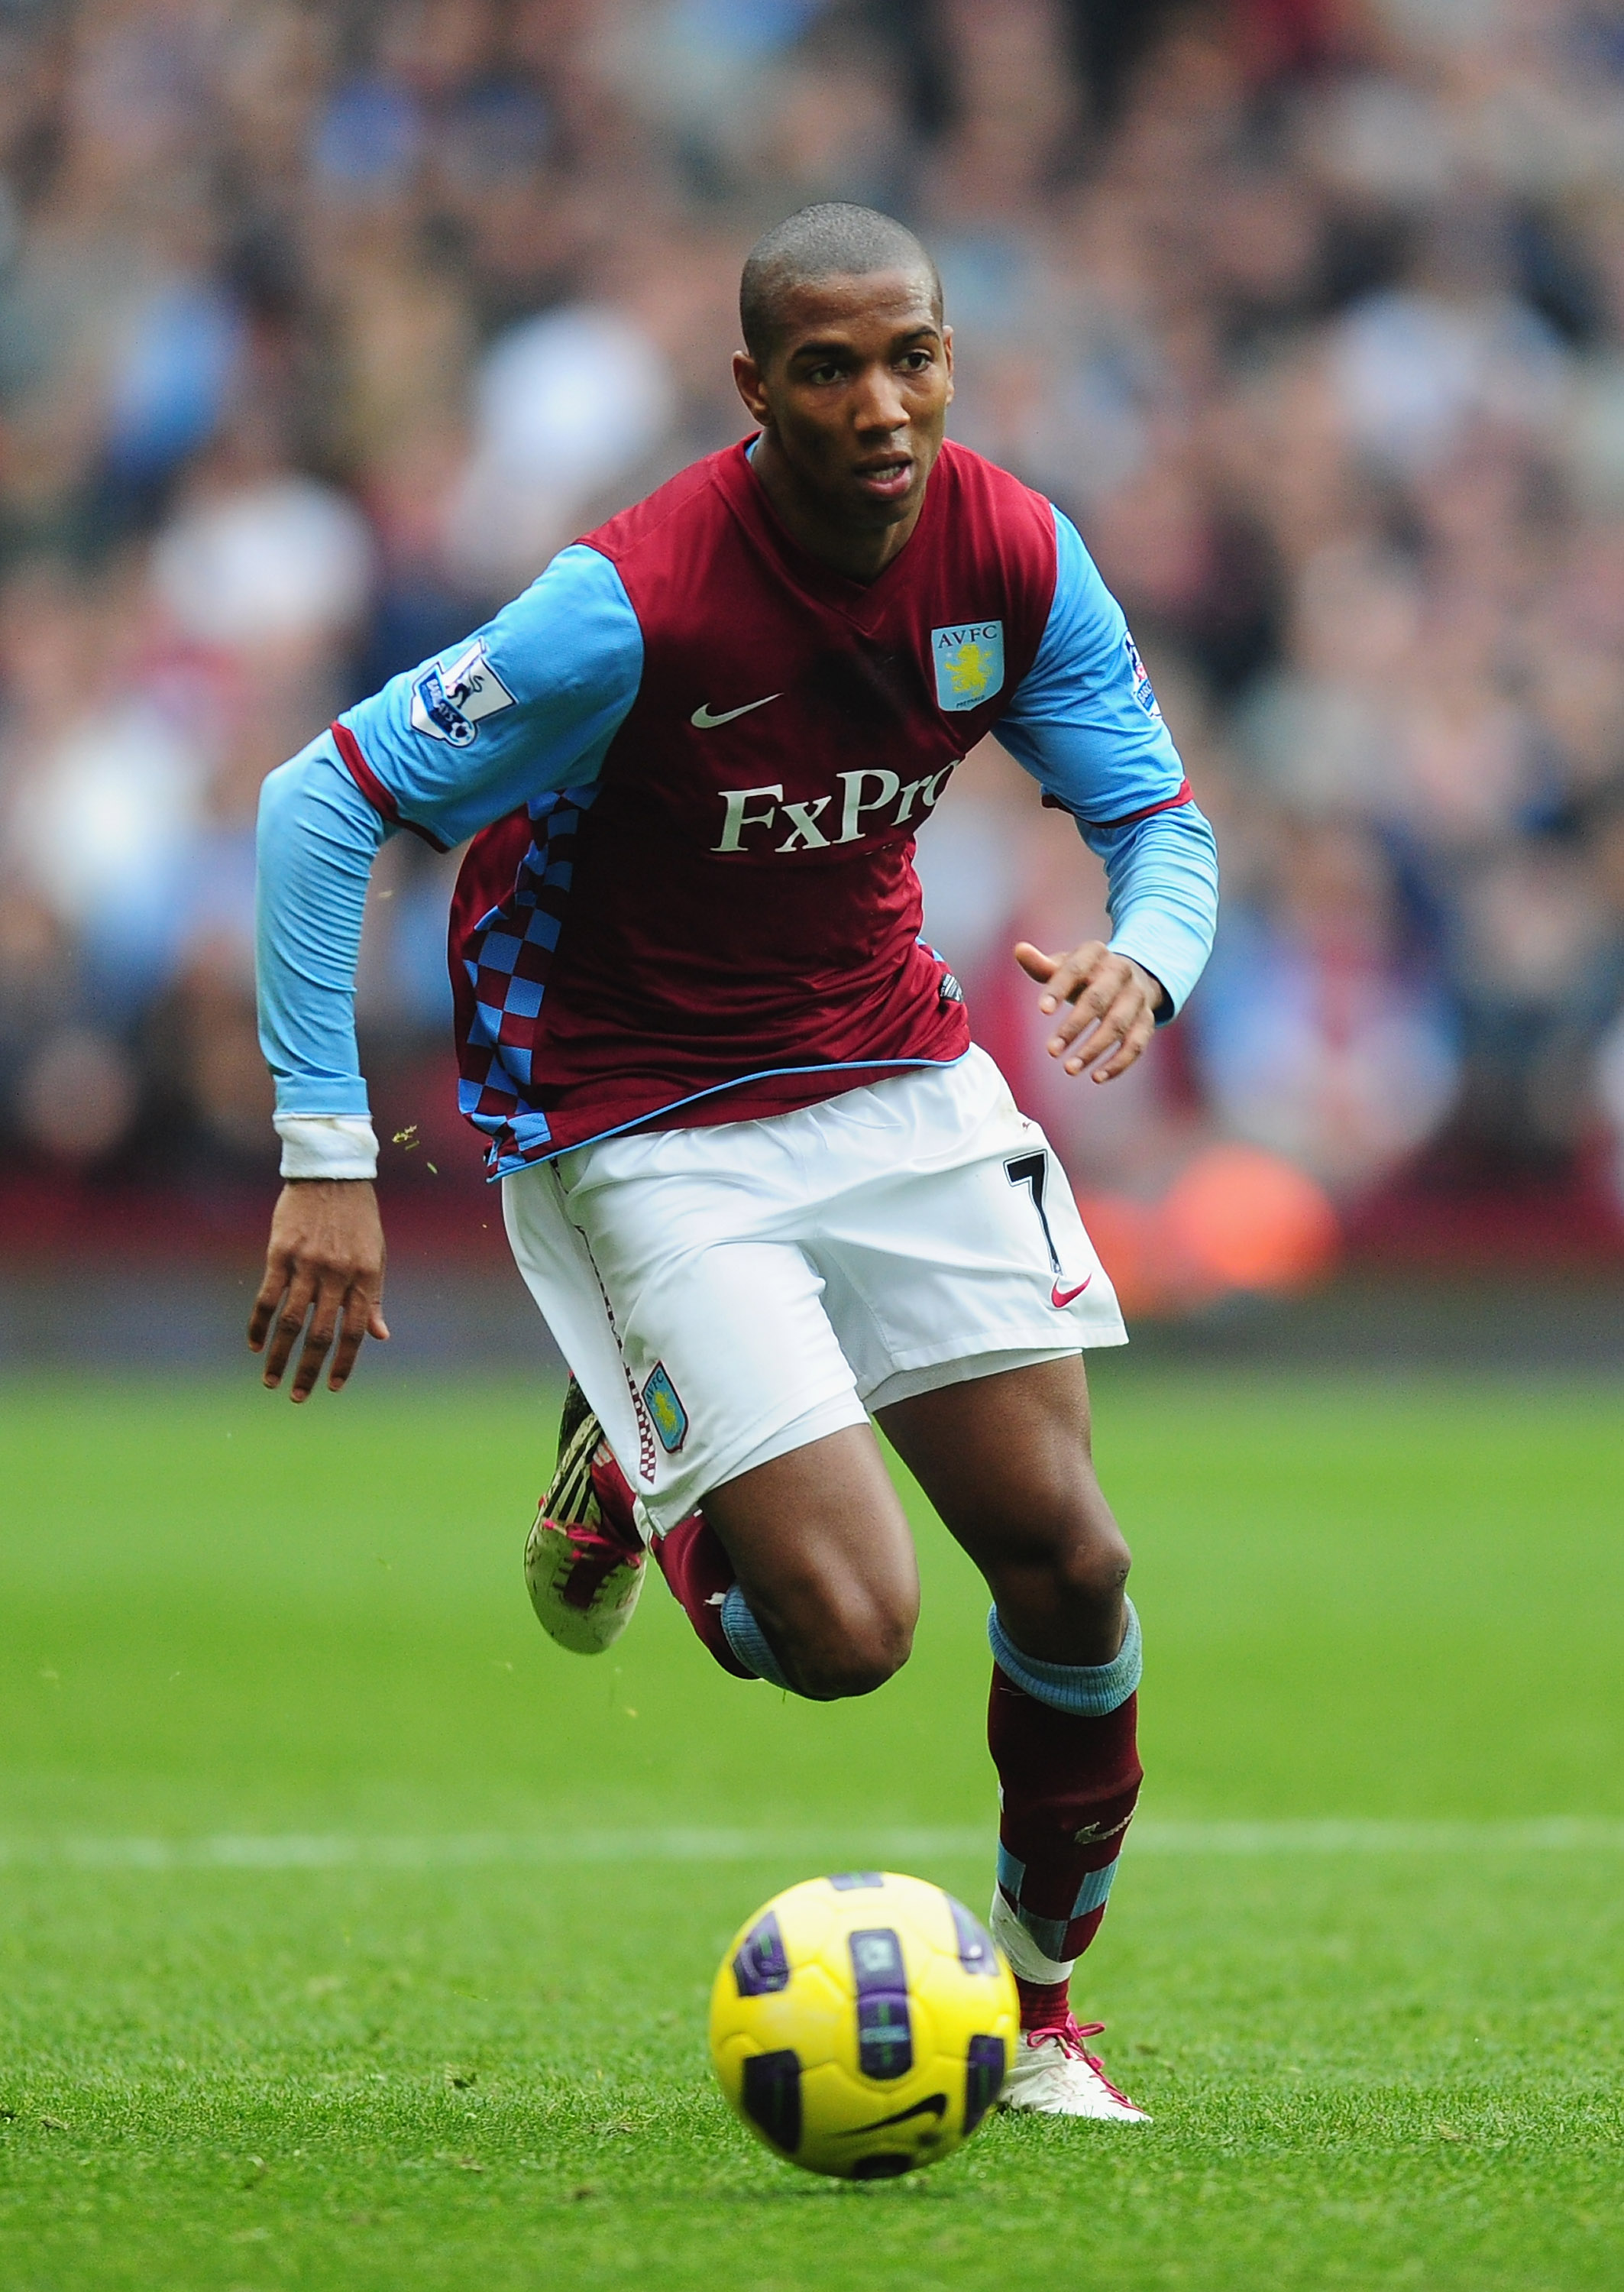 BIRMINGHAM, ENGLAND - OCTOBER 31:  Ashley Young of Aston Villa in action during the Barclays Premier League match between Aston Villa and Birmingham at Villa Park on October 31, 2010 in London, England.  (Photo by Mike Hewitt/Getty Images)